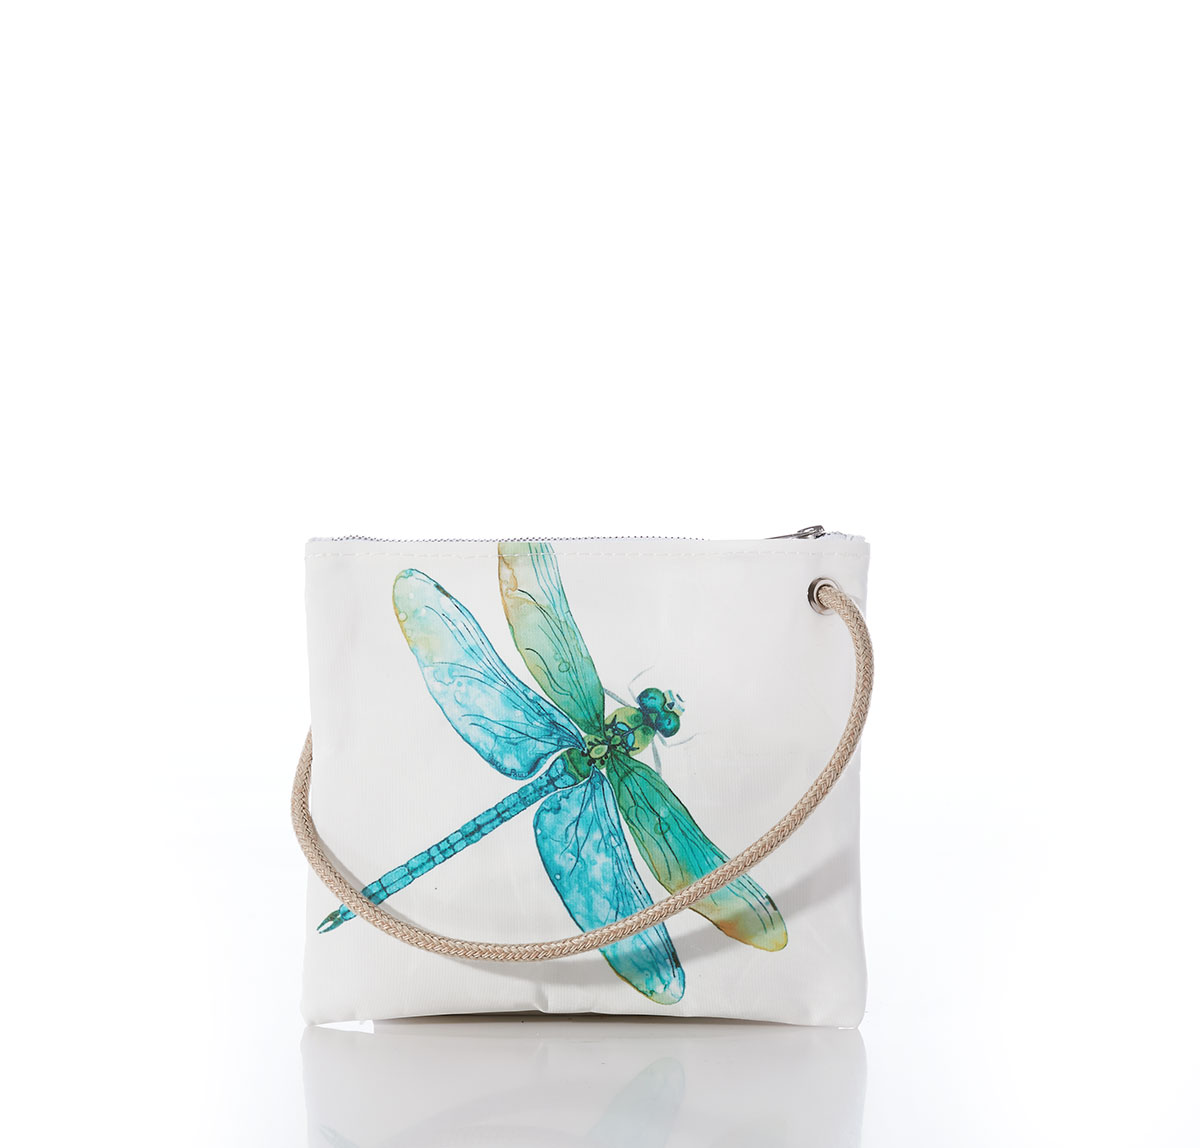 a dragonfly in light shades of blues and greens flies across a white recycled sail cloth crossbody bag with a tan braided dock line rope handle